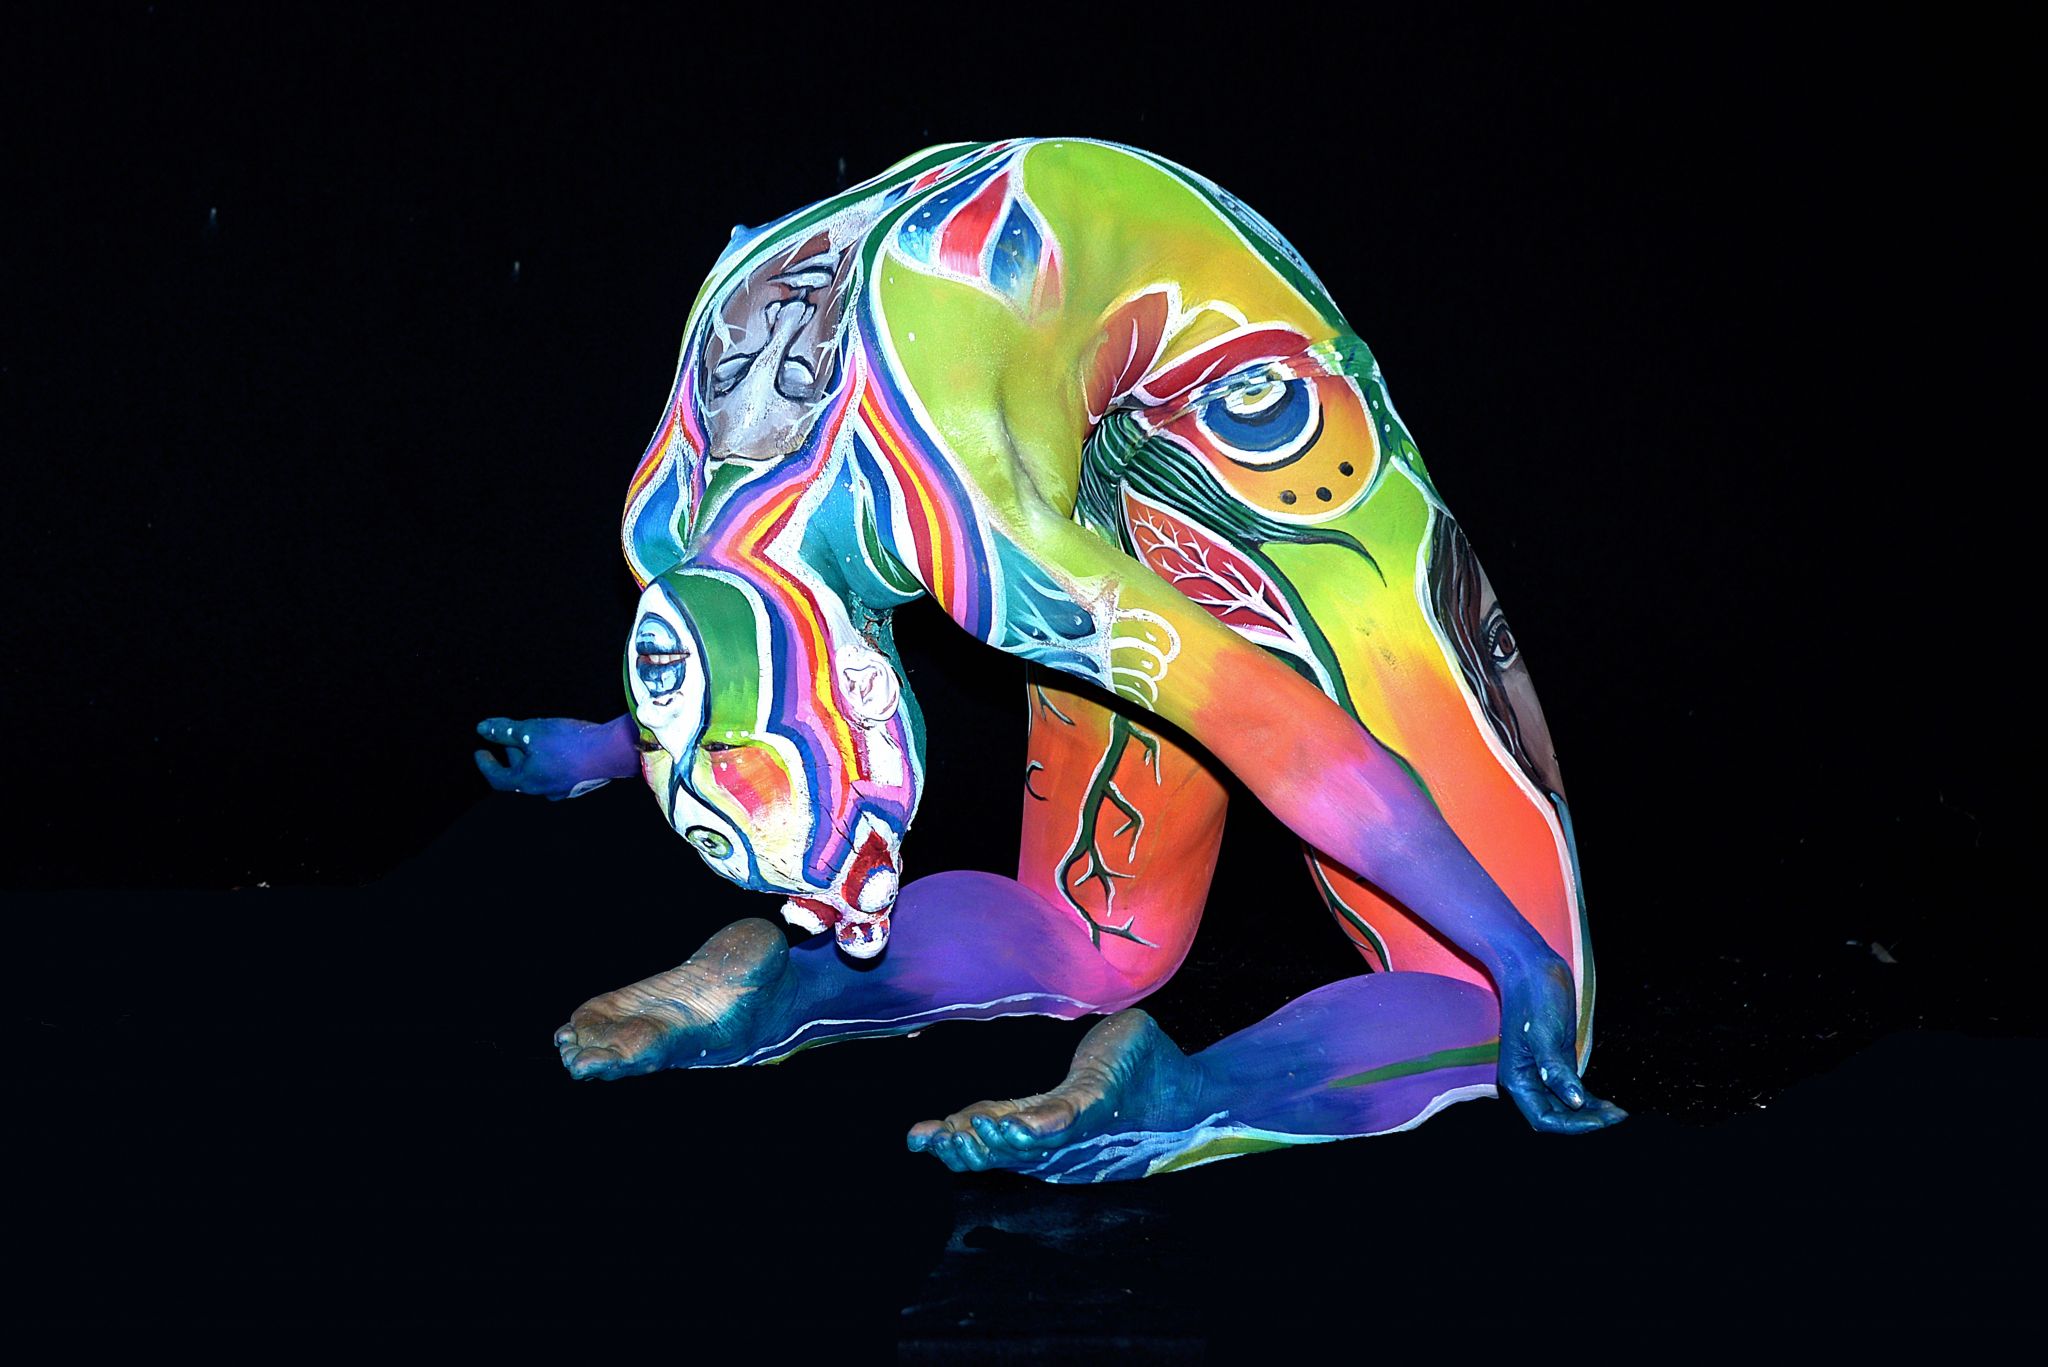 PHOTOS World Bodypainting Festival Gets Creative Naked In Austria